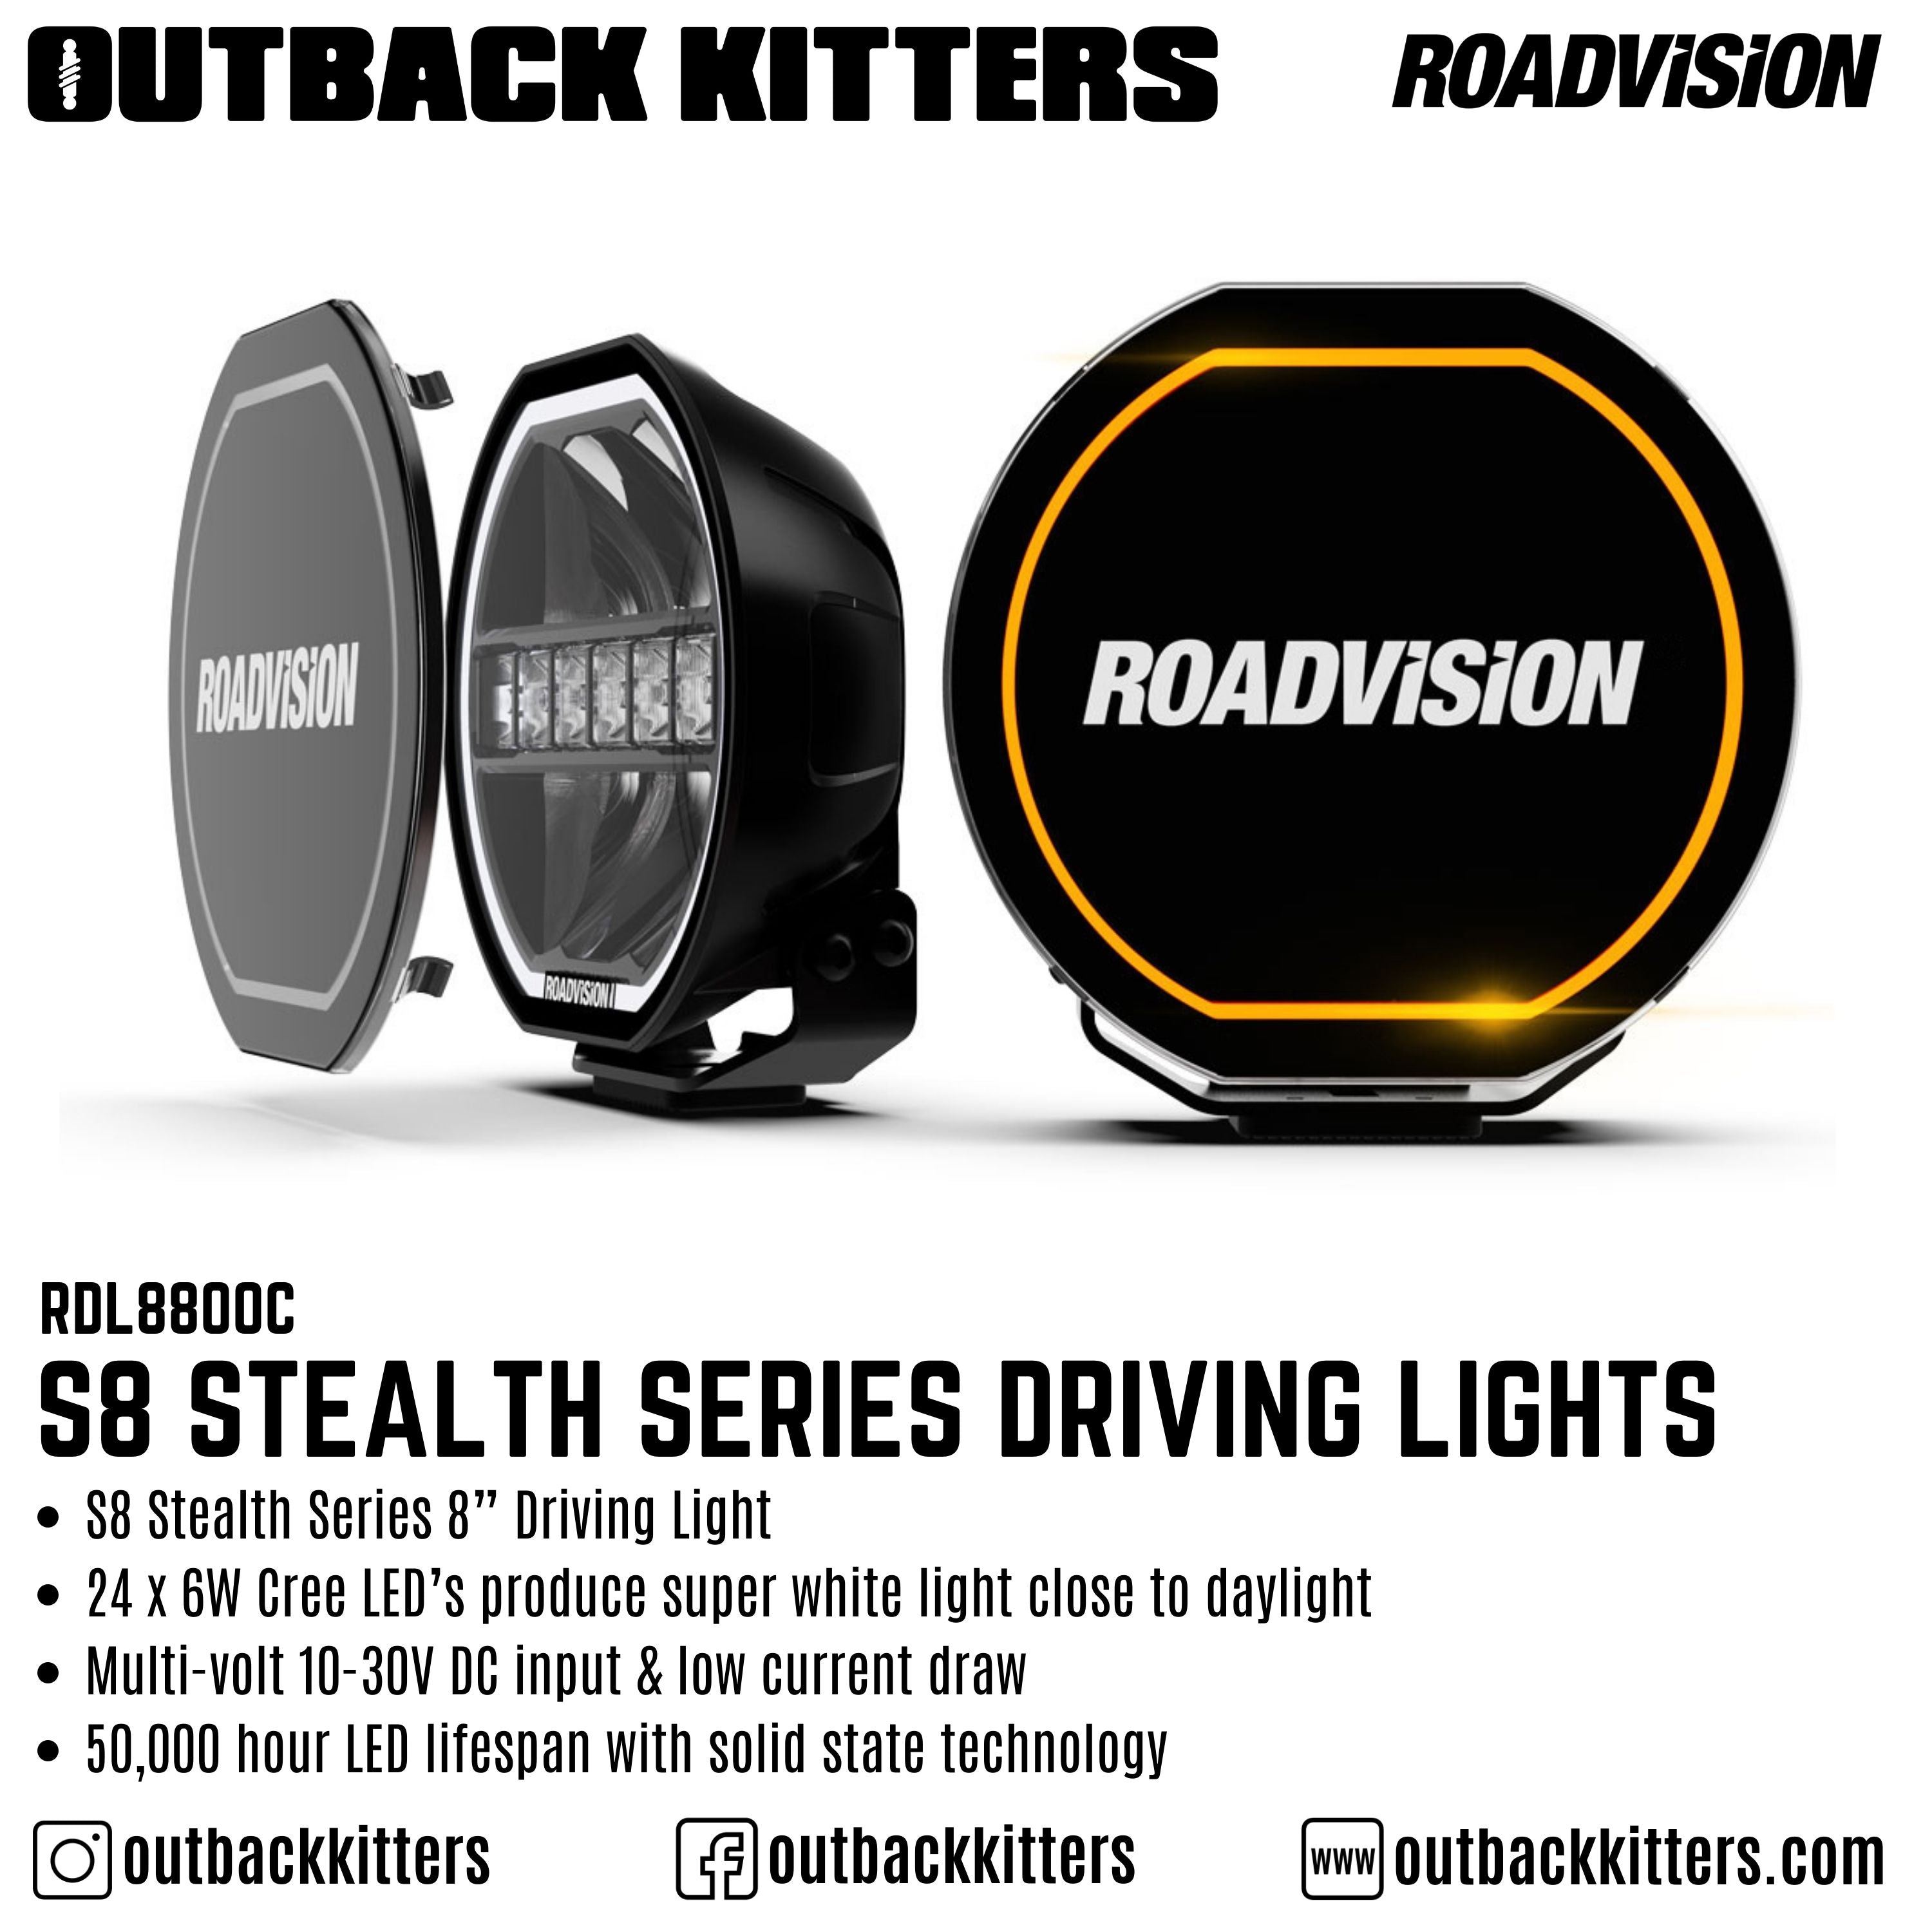 Roadvision S8 Stealth Series Driving Lights - Outback Kitters